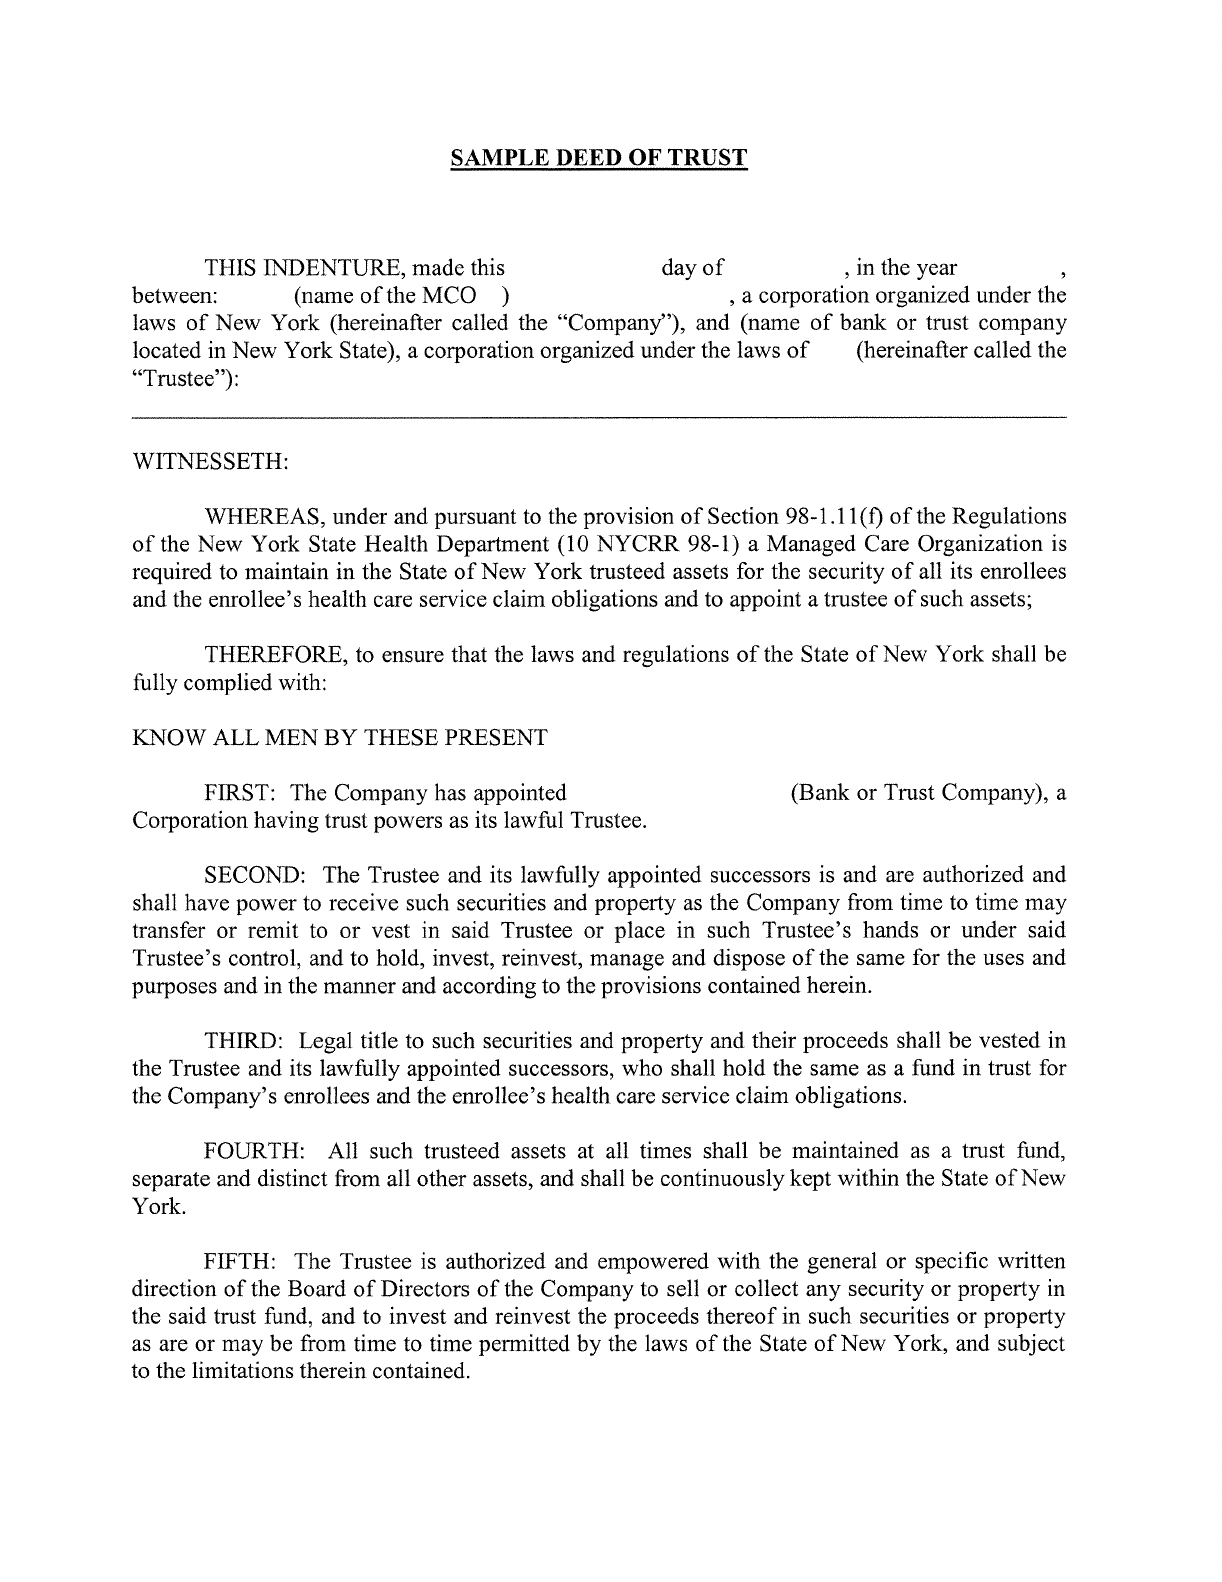 mers assignment of deed of trust form